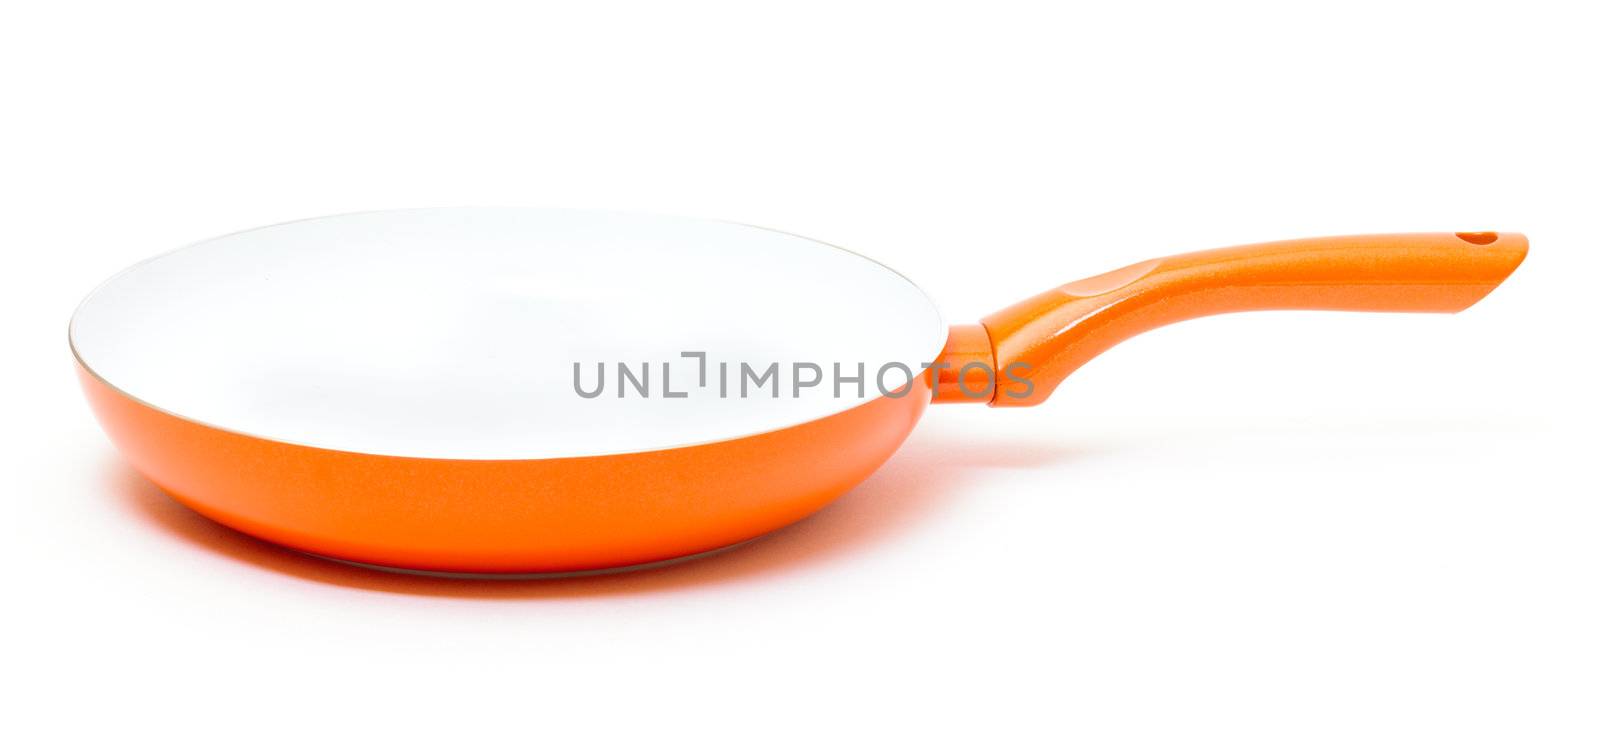 Orange Frying Pan with a nonstick ceramic coating on white background